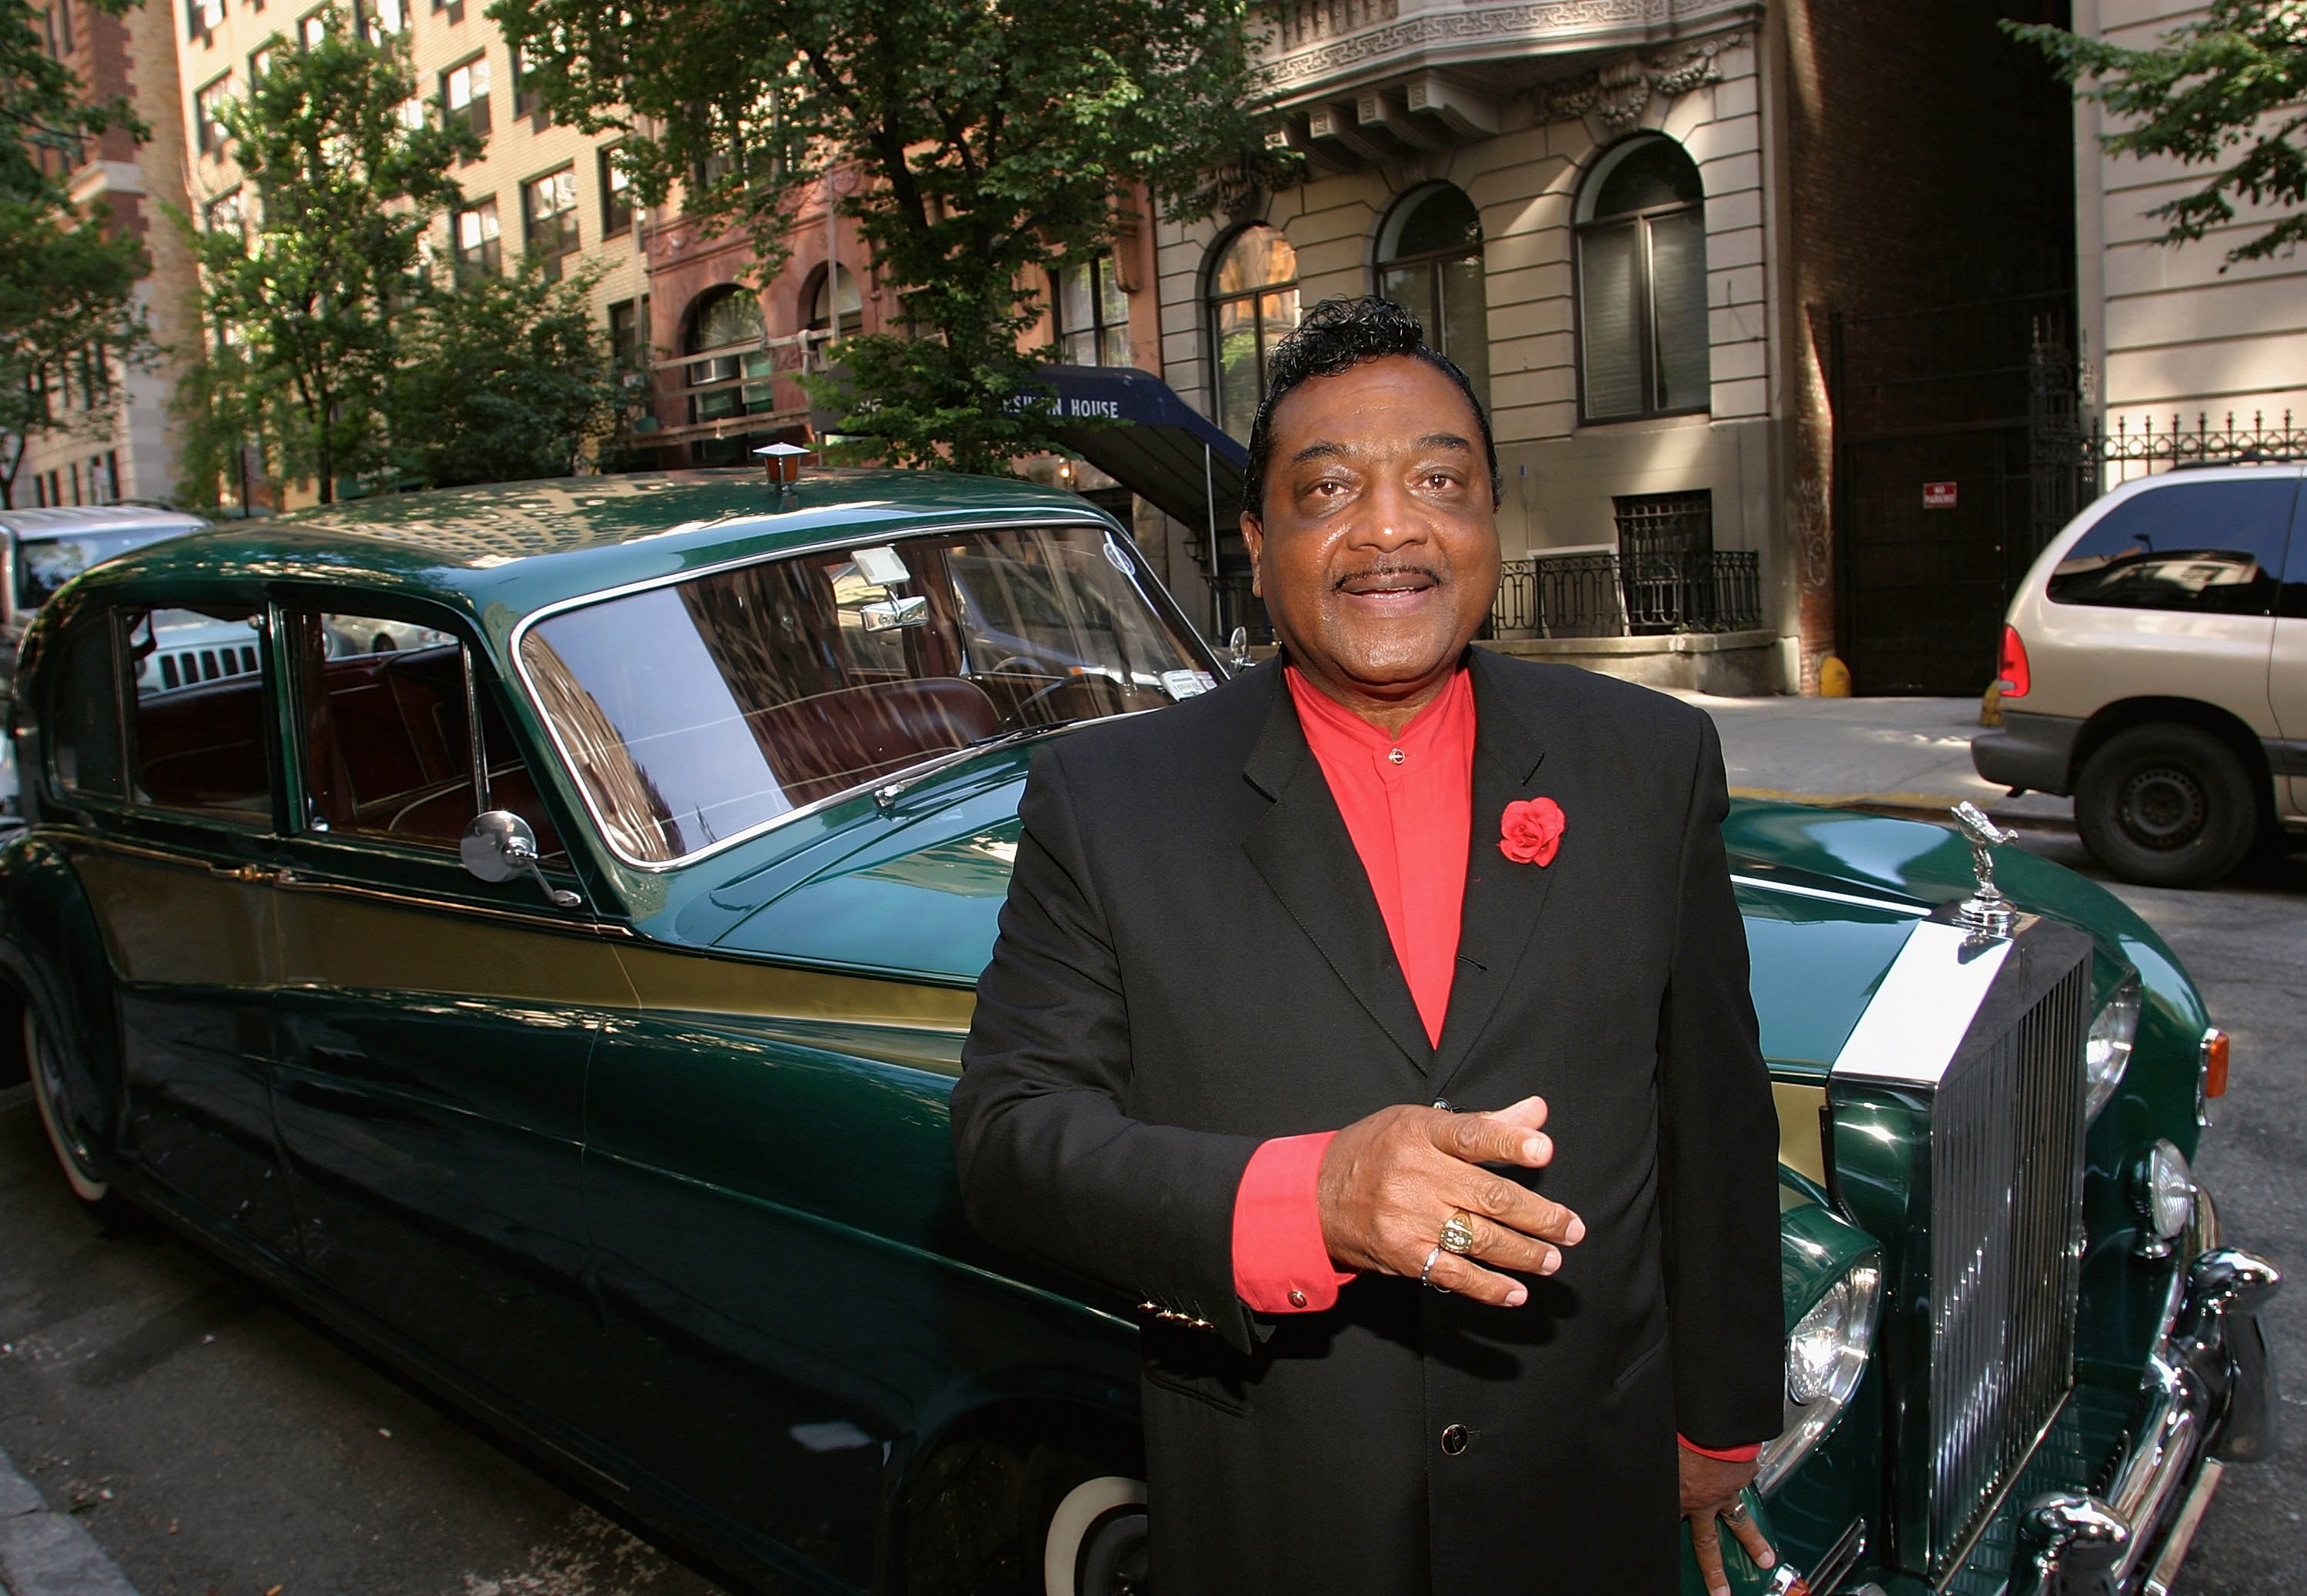 Reverend Ike in front of a car